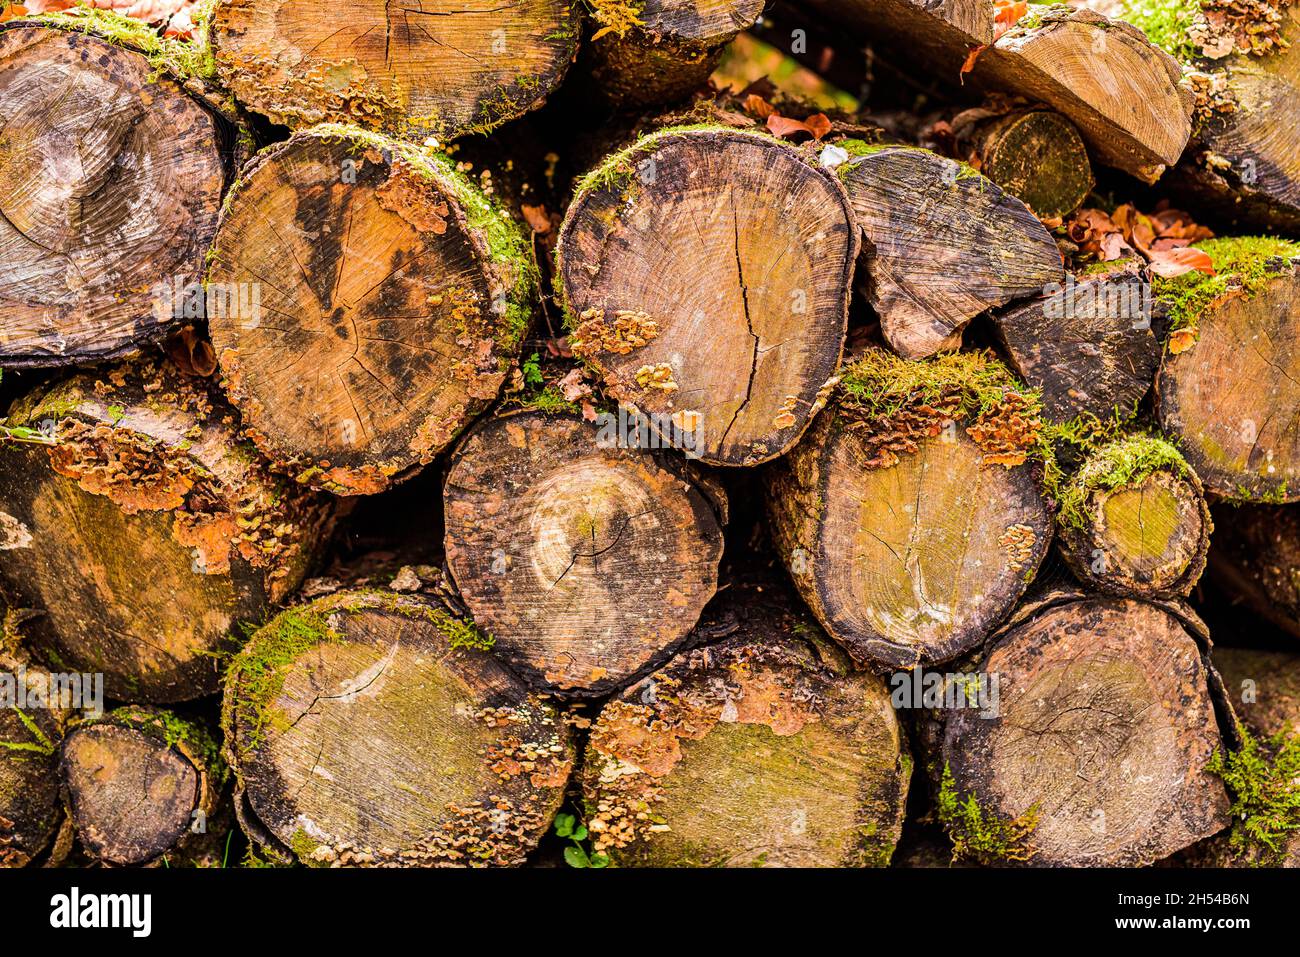 Stack of cut tree trunks in the forest, overgrown with moss and mushrooms Stock Photo